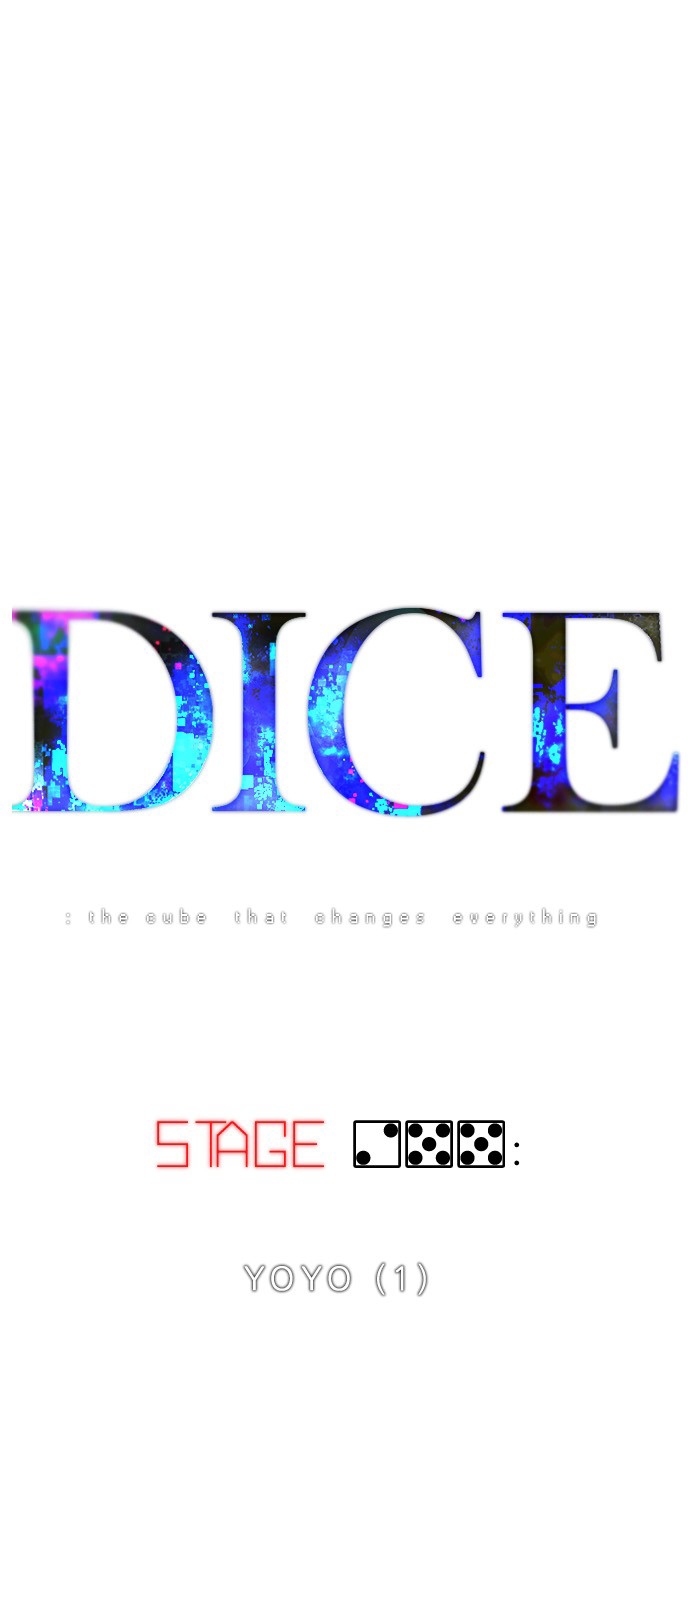 DICE: The Cube that Changes Everything Ch. 255 YOYO (1)